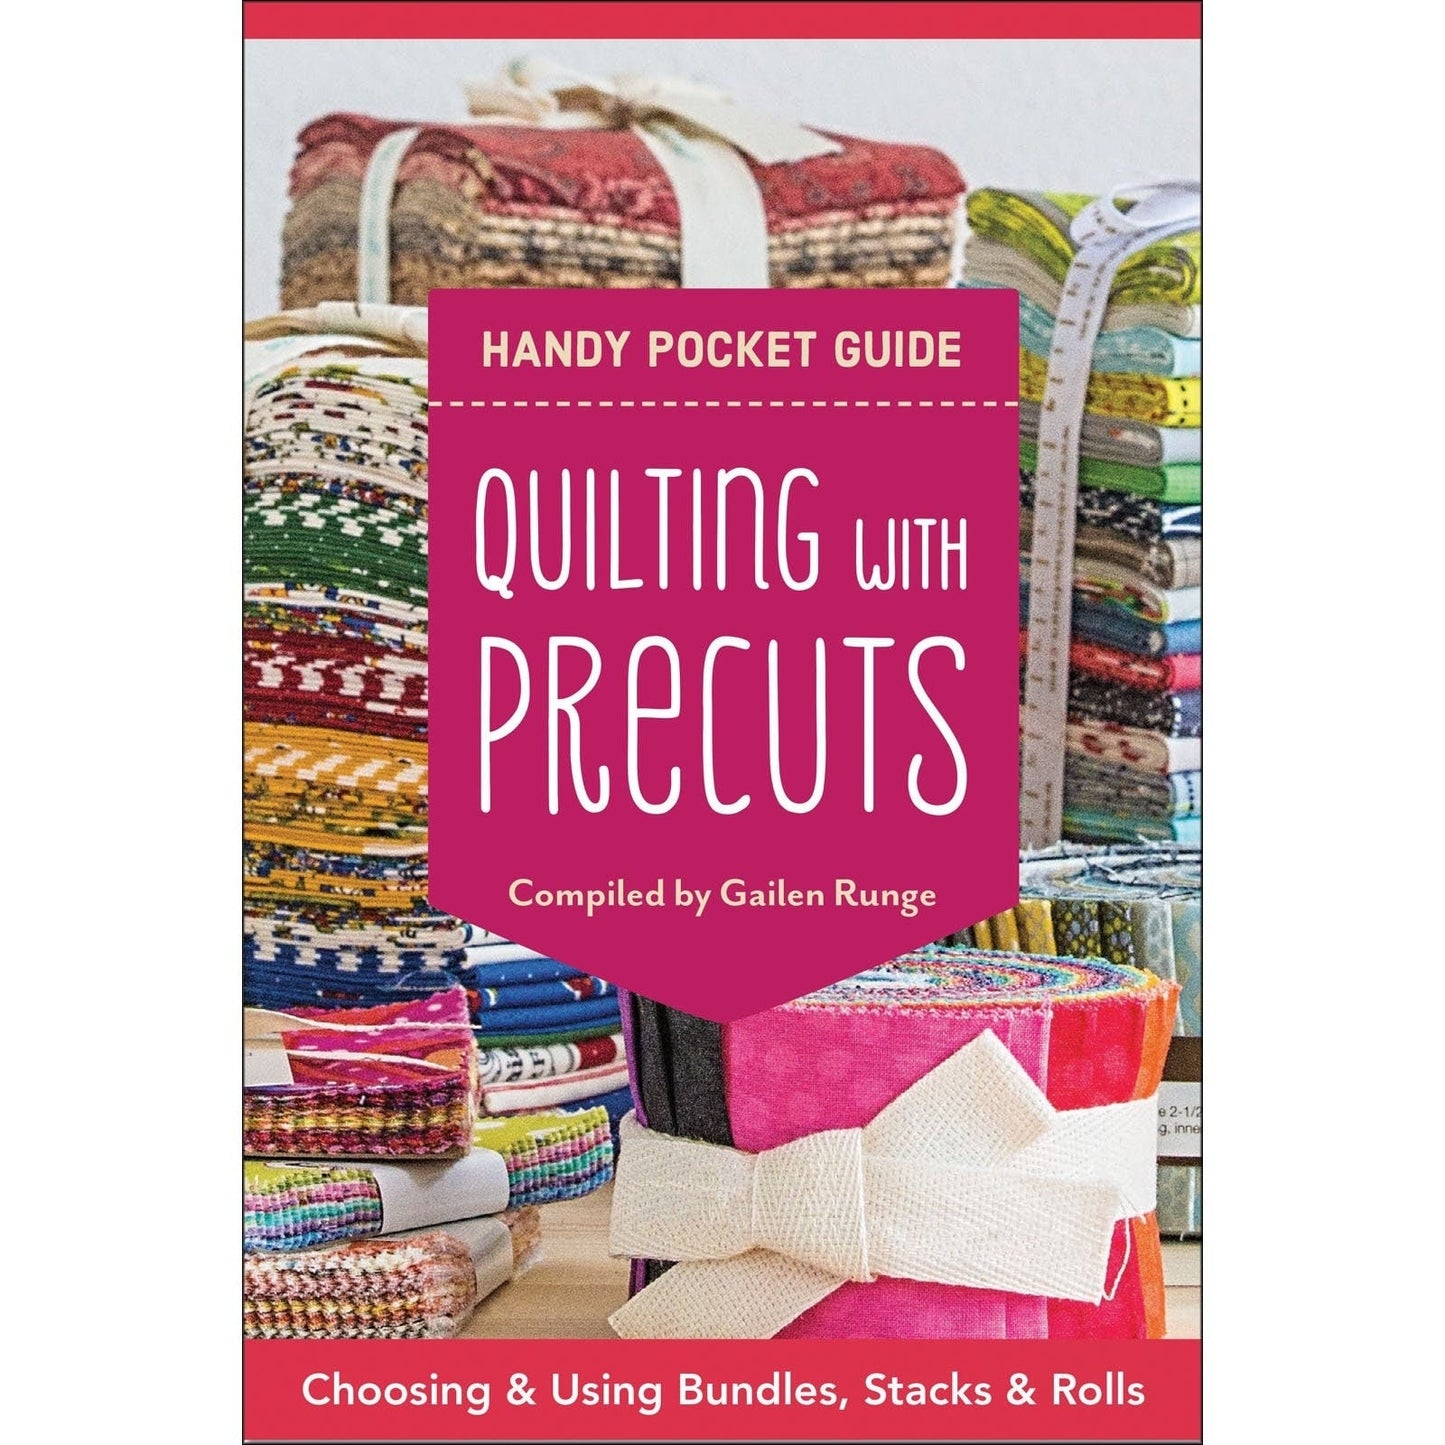 Quilting with Precuts a Handy Pocket Guide compiled by Gailen Runge for C&T Publishing